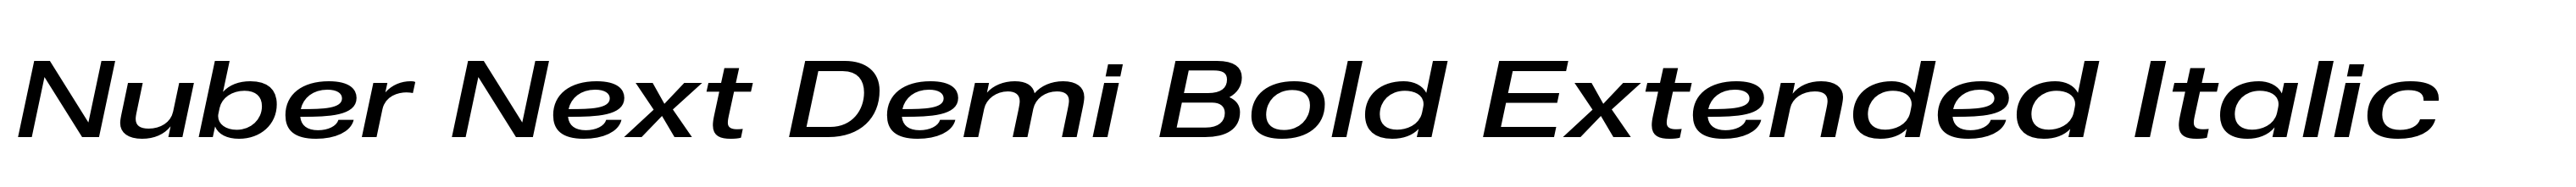 Nuber Next Demi Bold Extended Italic